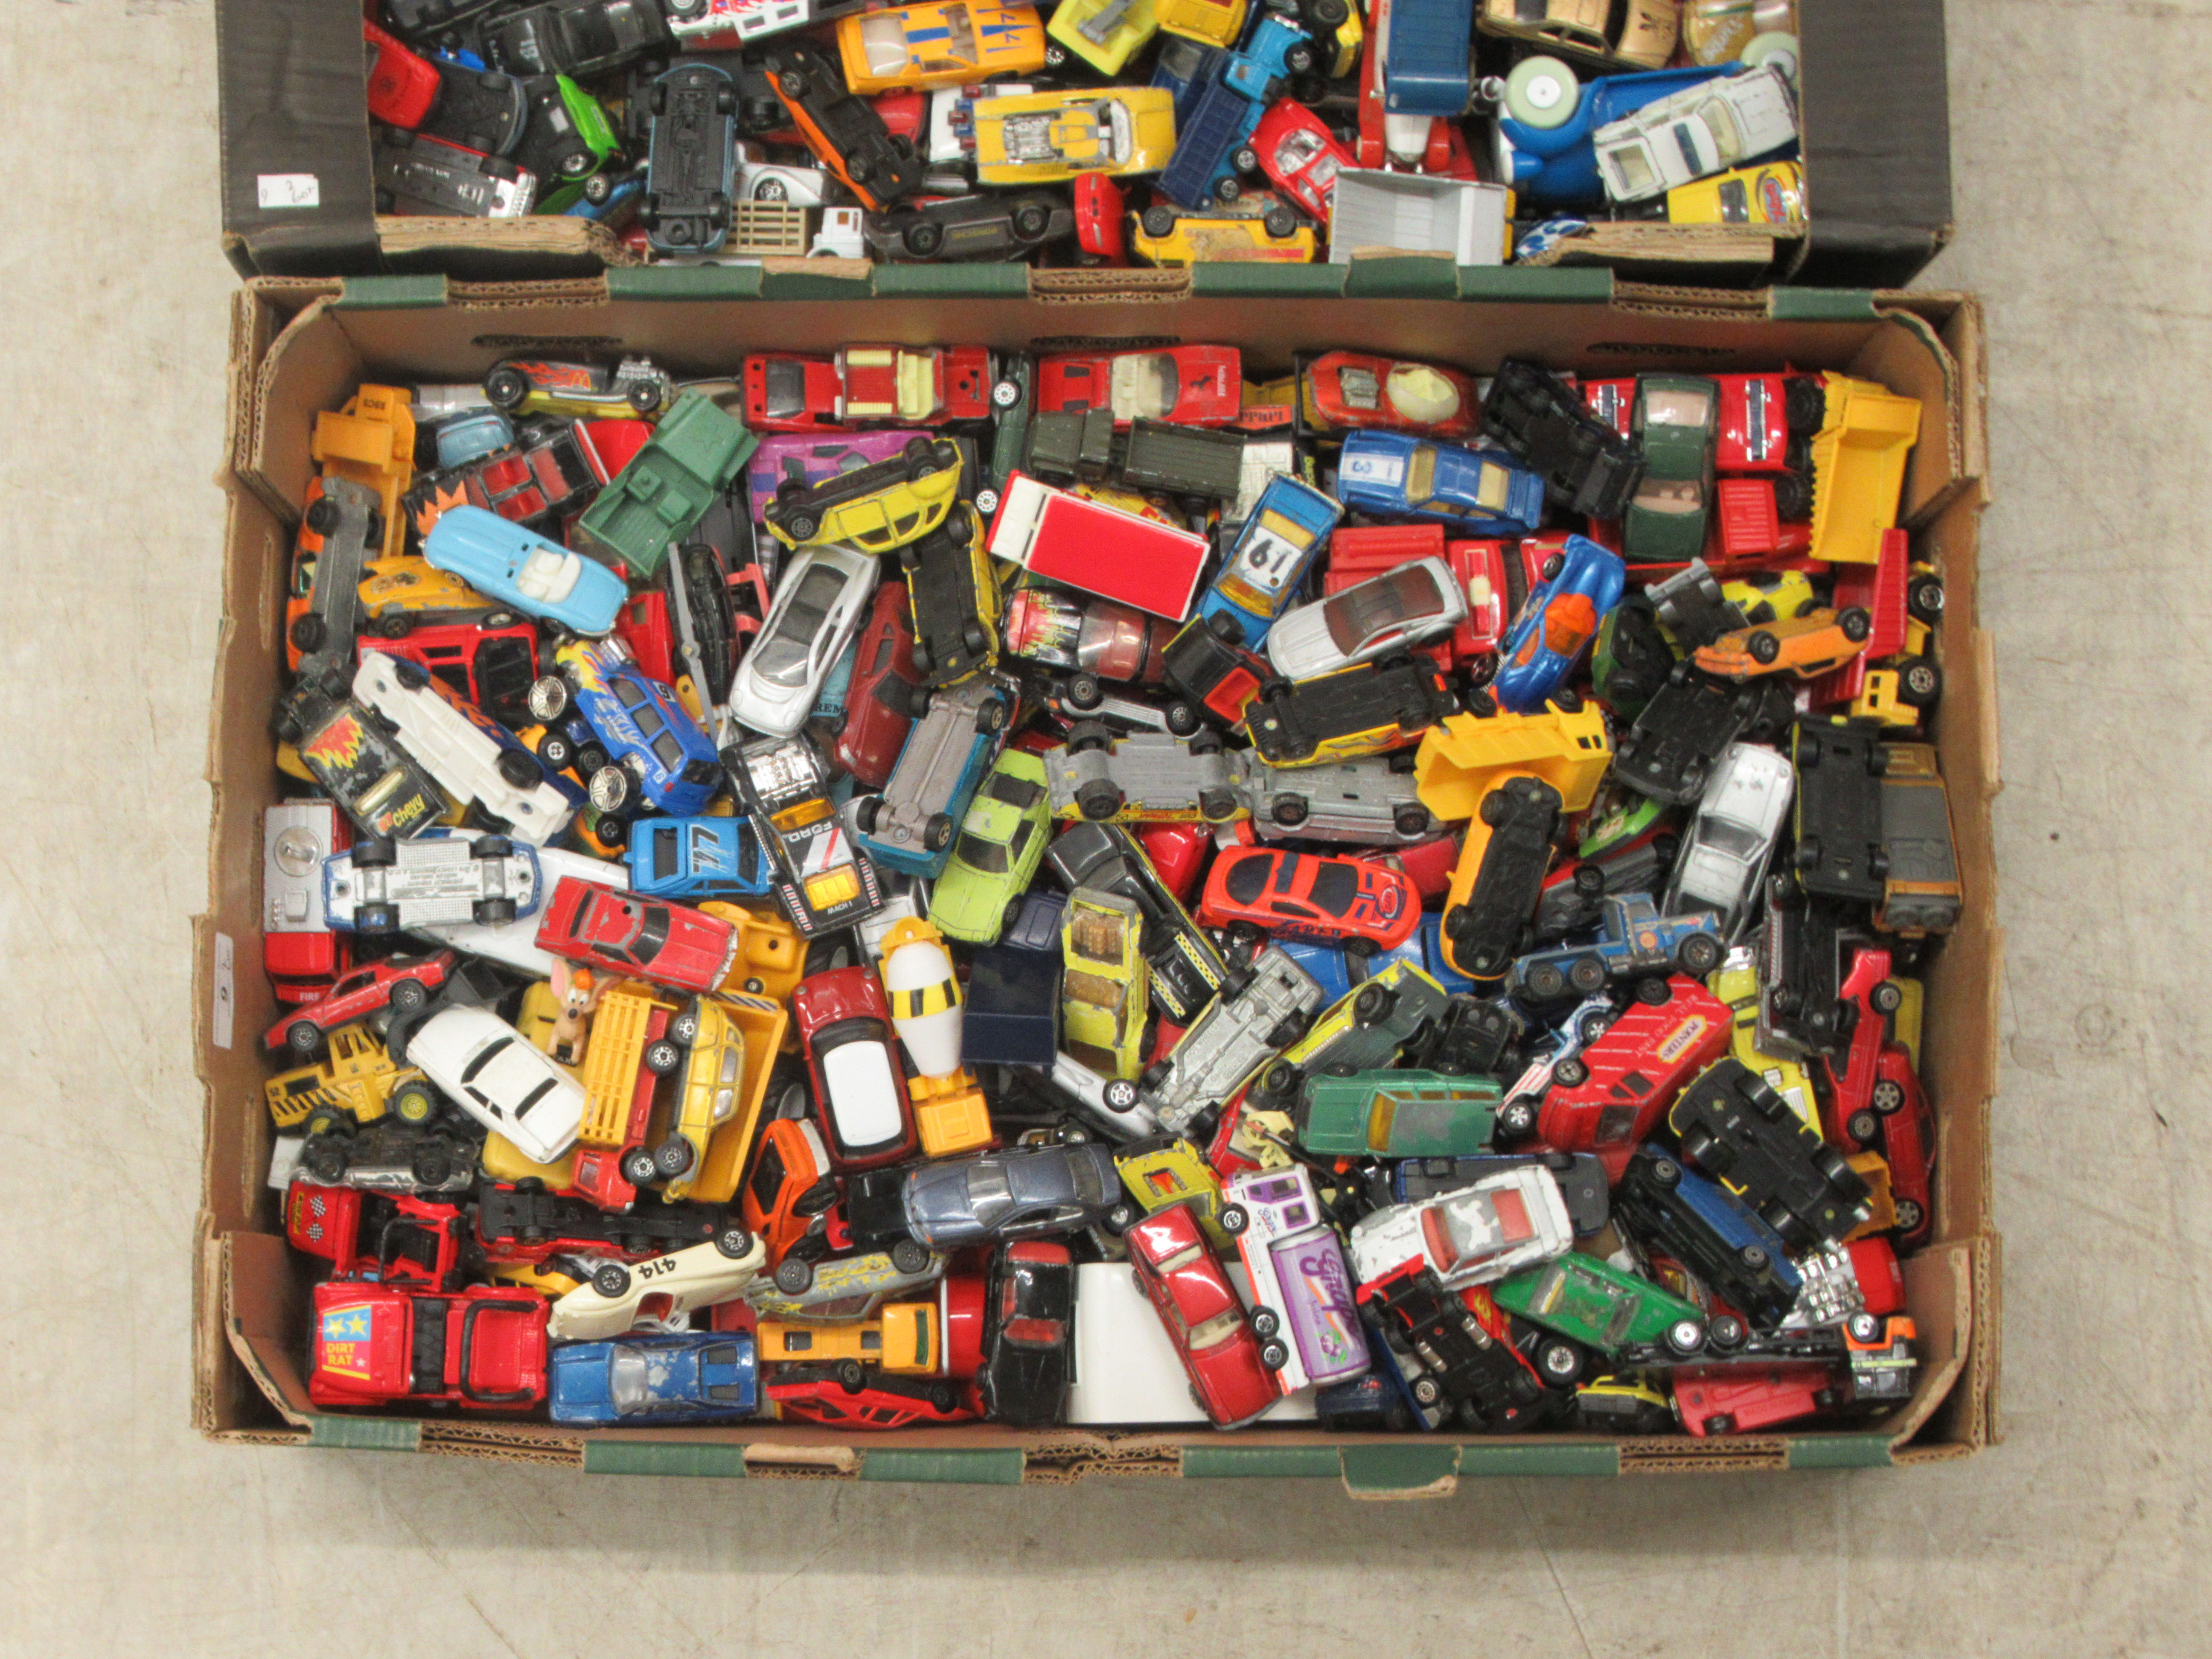 Uncollated diecast model vehicles, sports cars, convertibles, vans and emergency services: to - Image 3 of 3